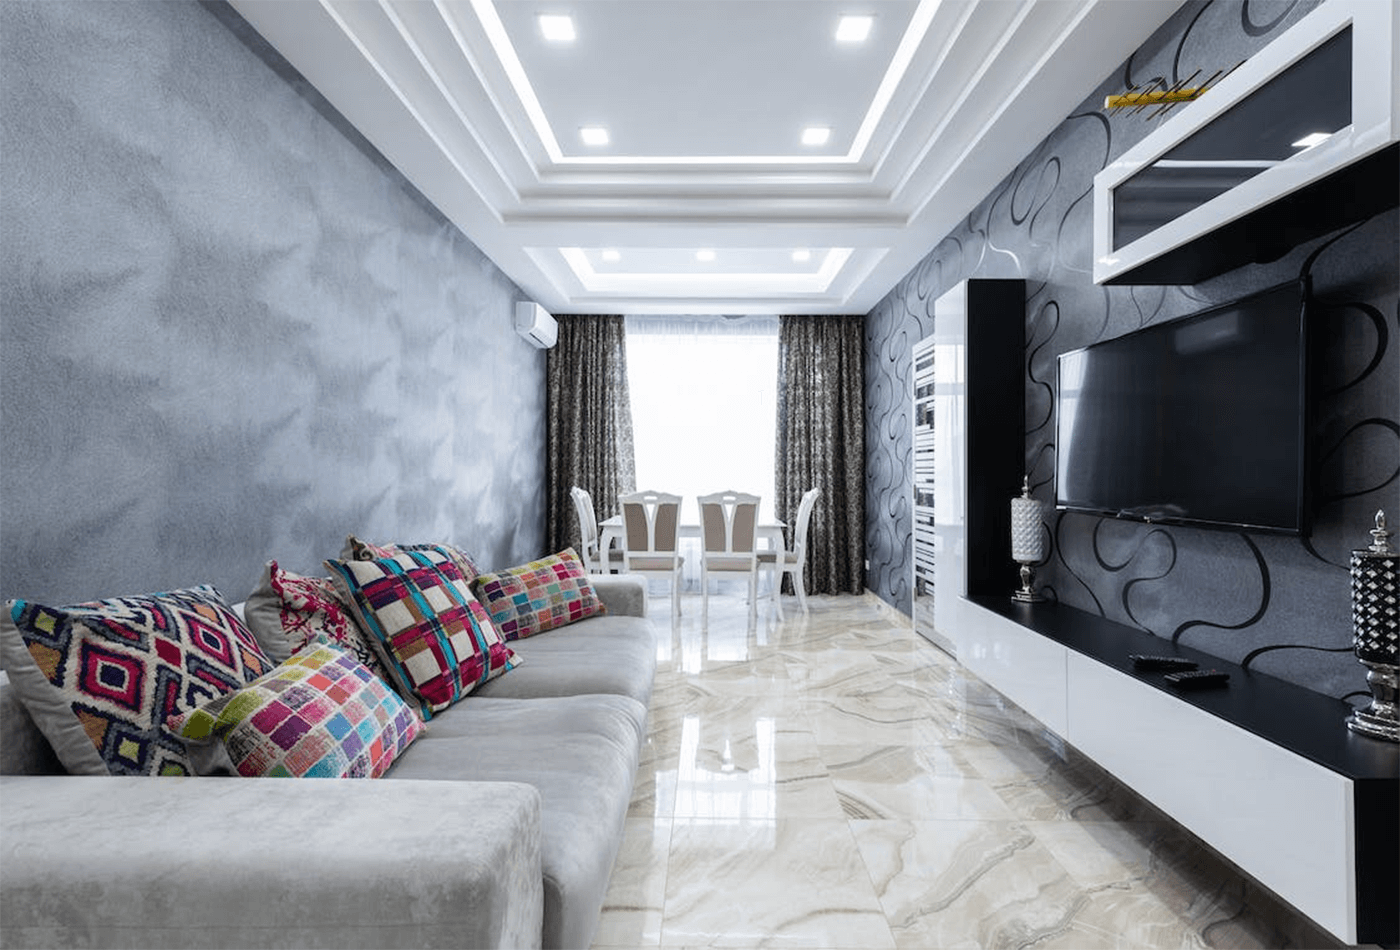 Get Marble-Effect Design for Your Home Renovations